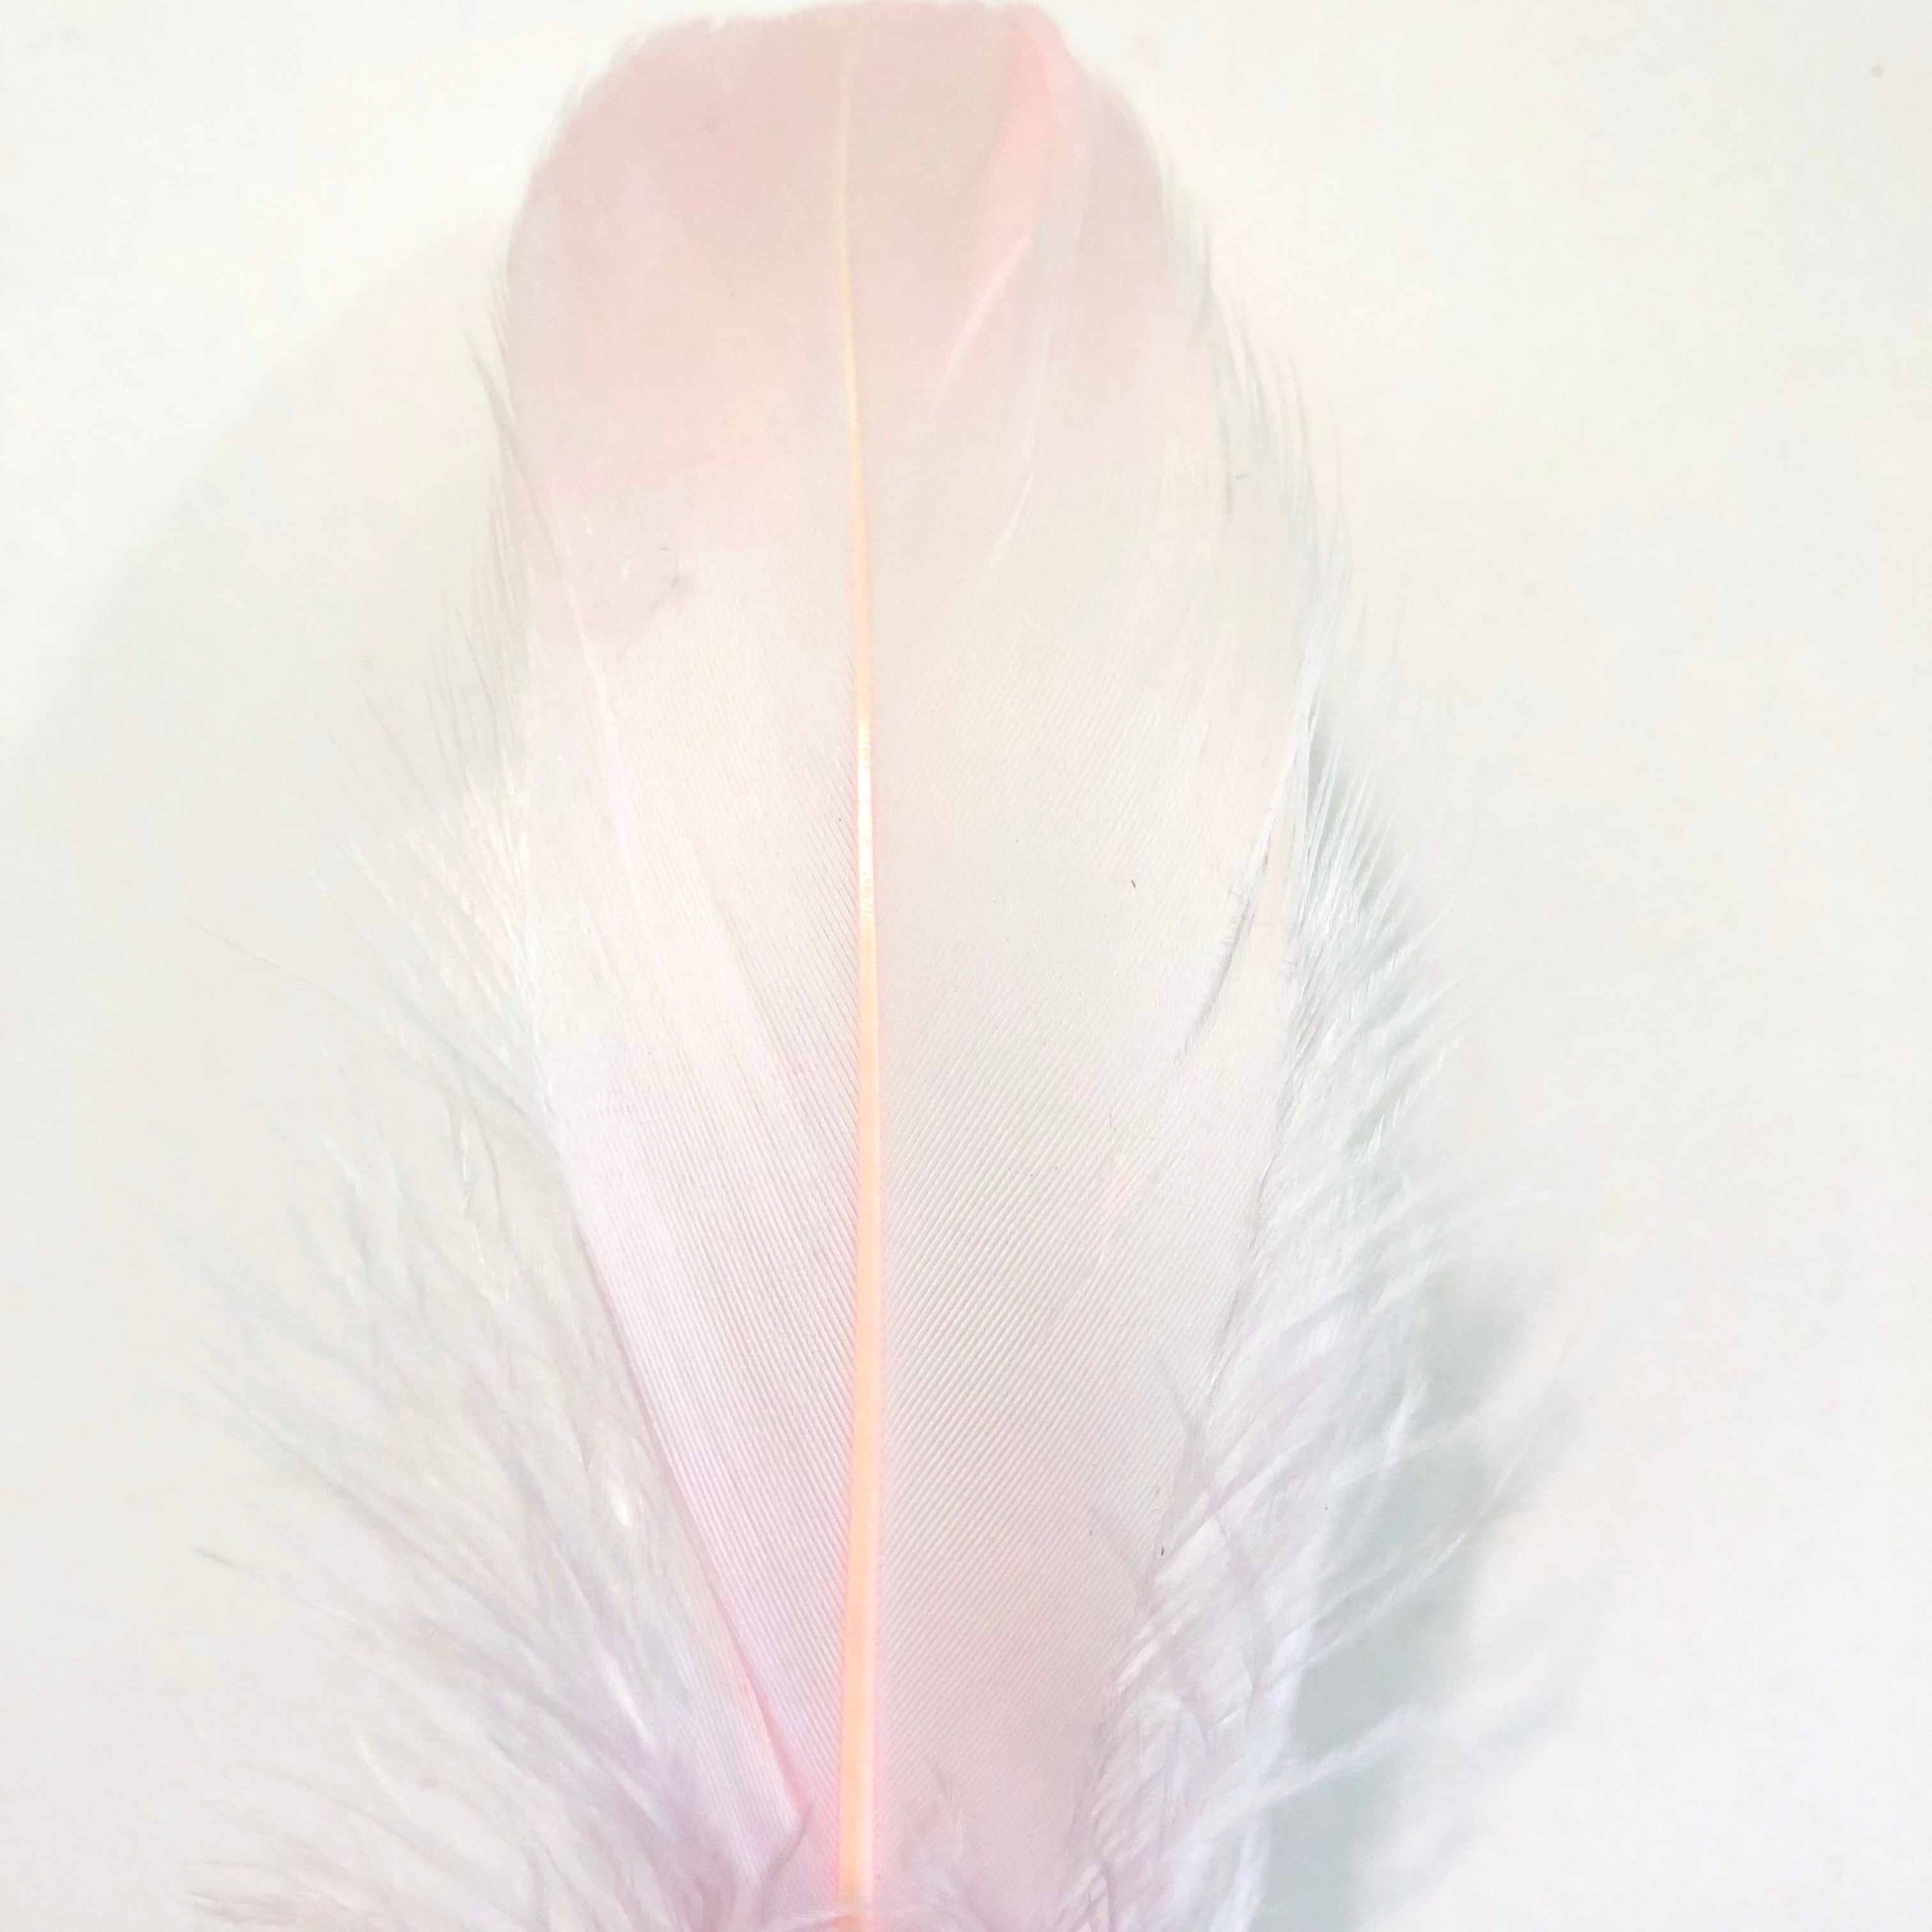 Goose Nagoire Feathers 10 grams - Pink